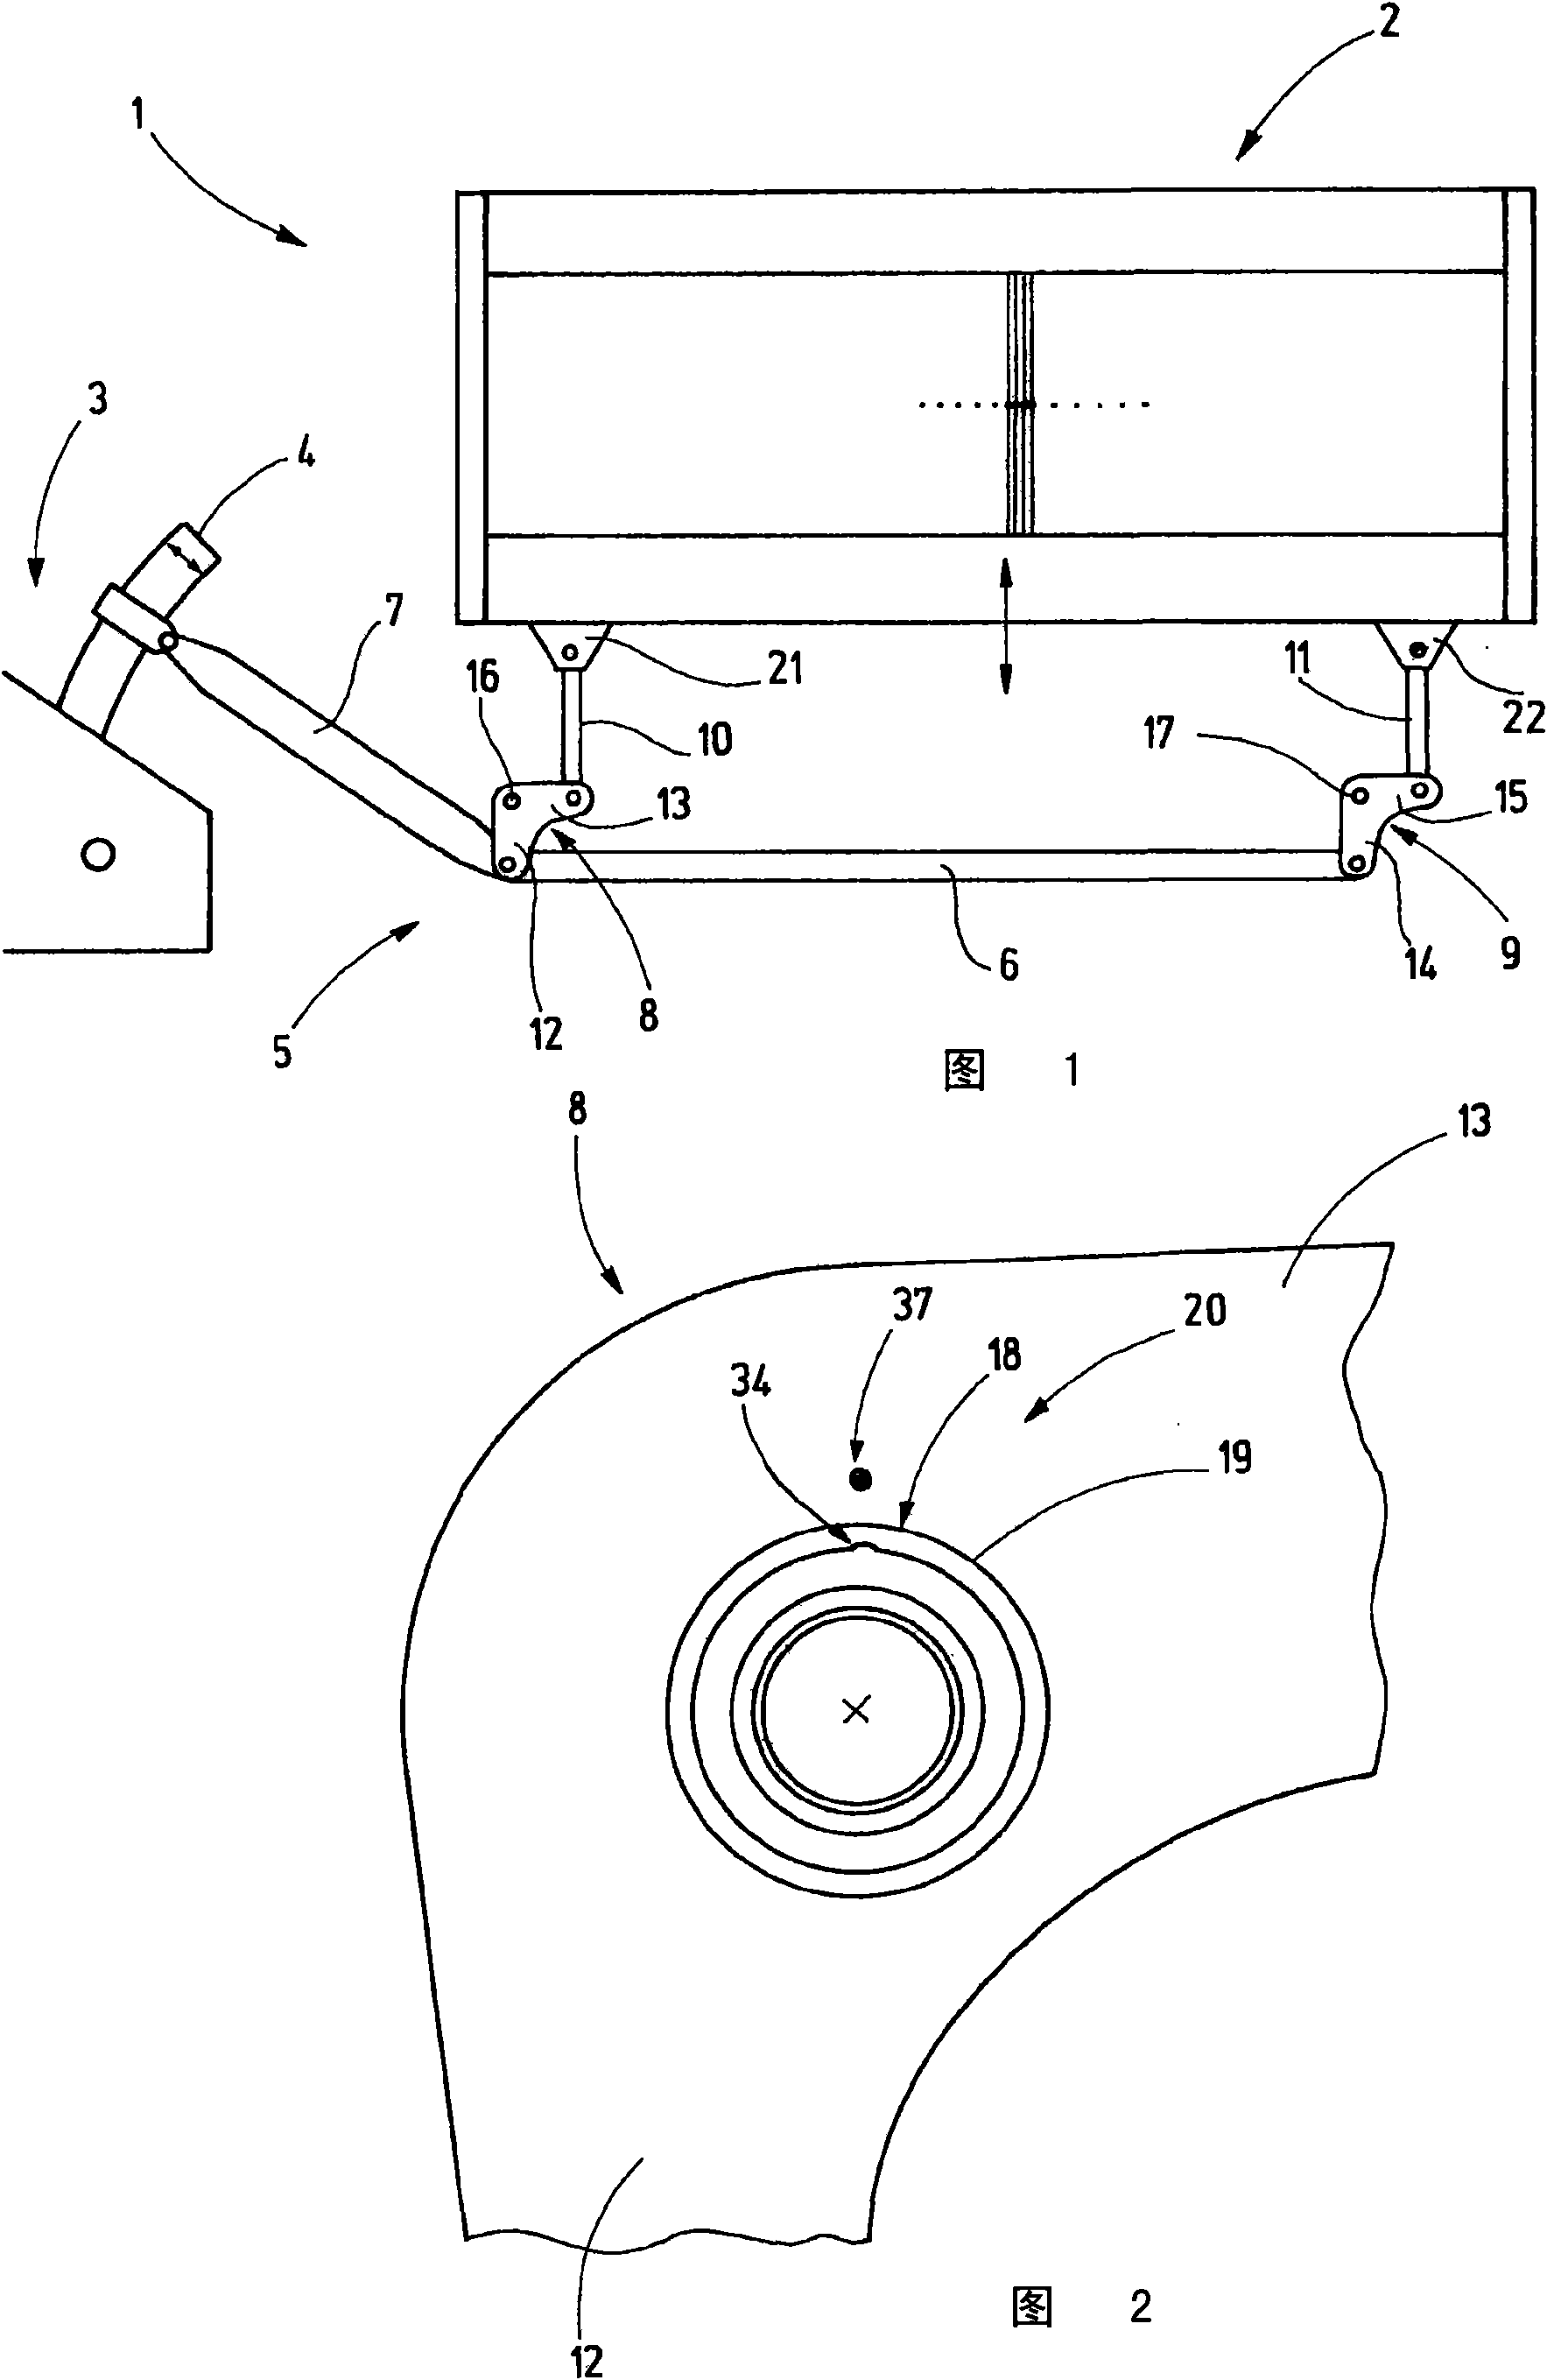 Storage device and beam for loom